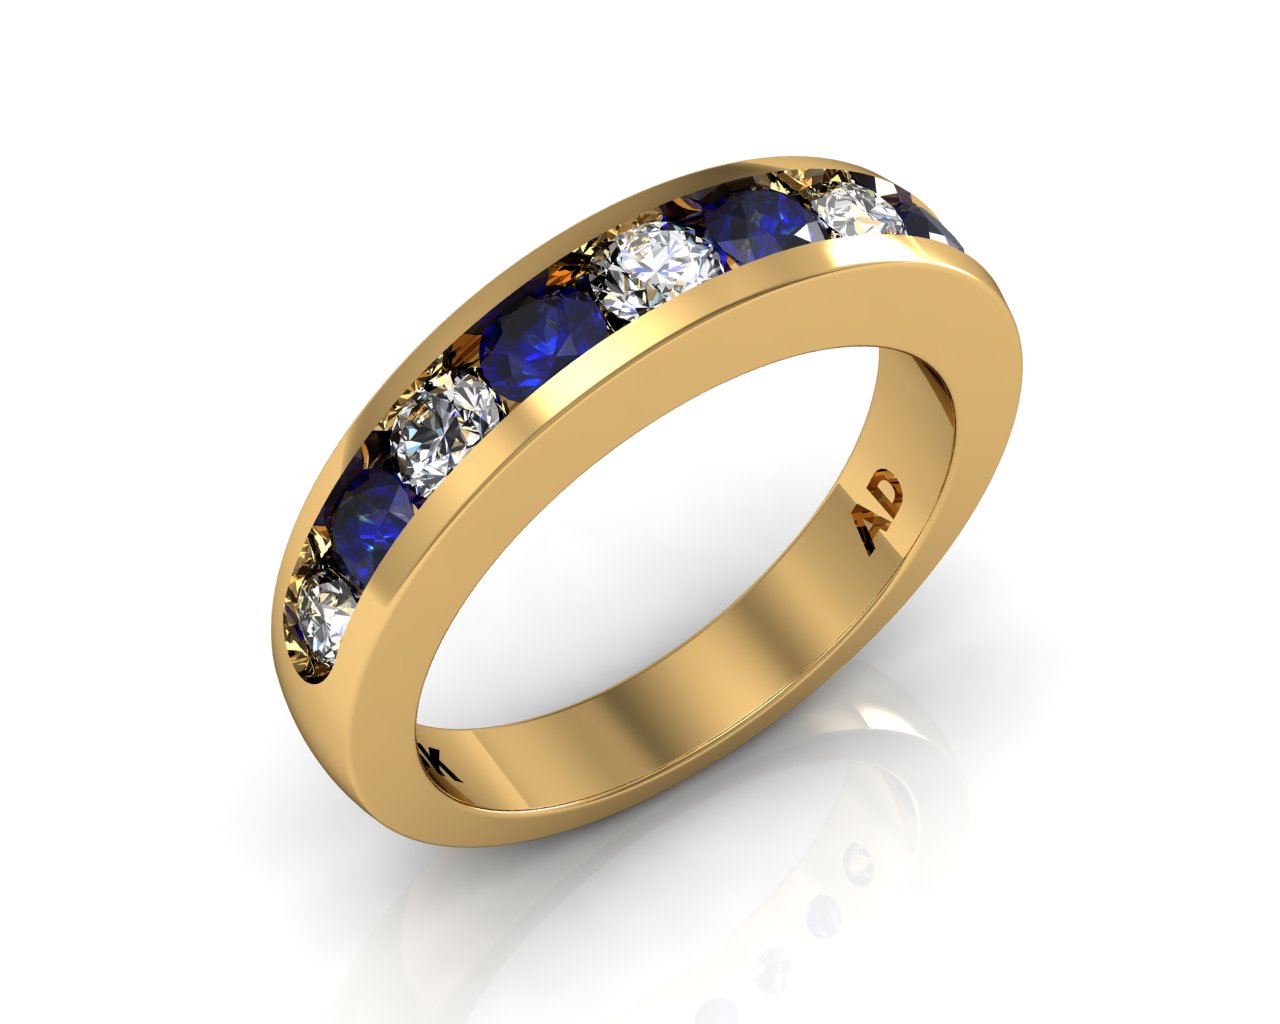 Wedding Bands Ladies Channel 9 Stone 1.0 TCW Diamonds and Blue Sapphire 6.1g 18kt Yellow Gold South Bay Gold - Torrance